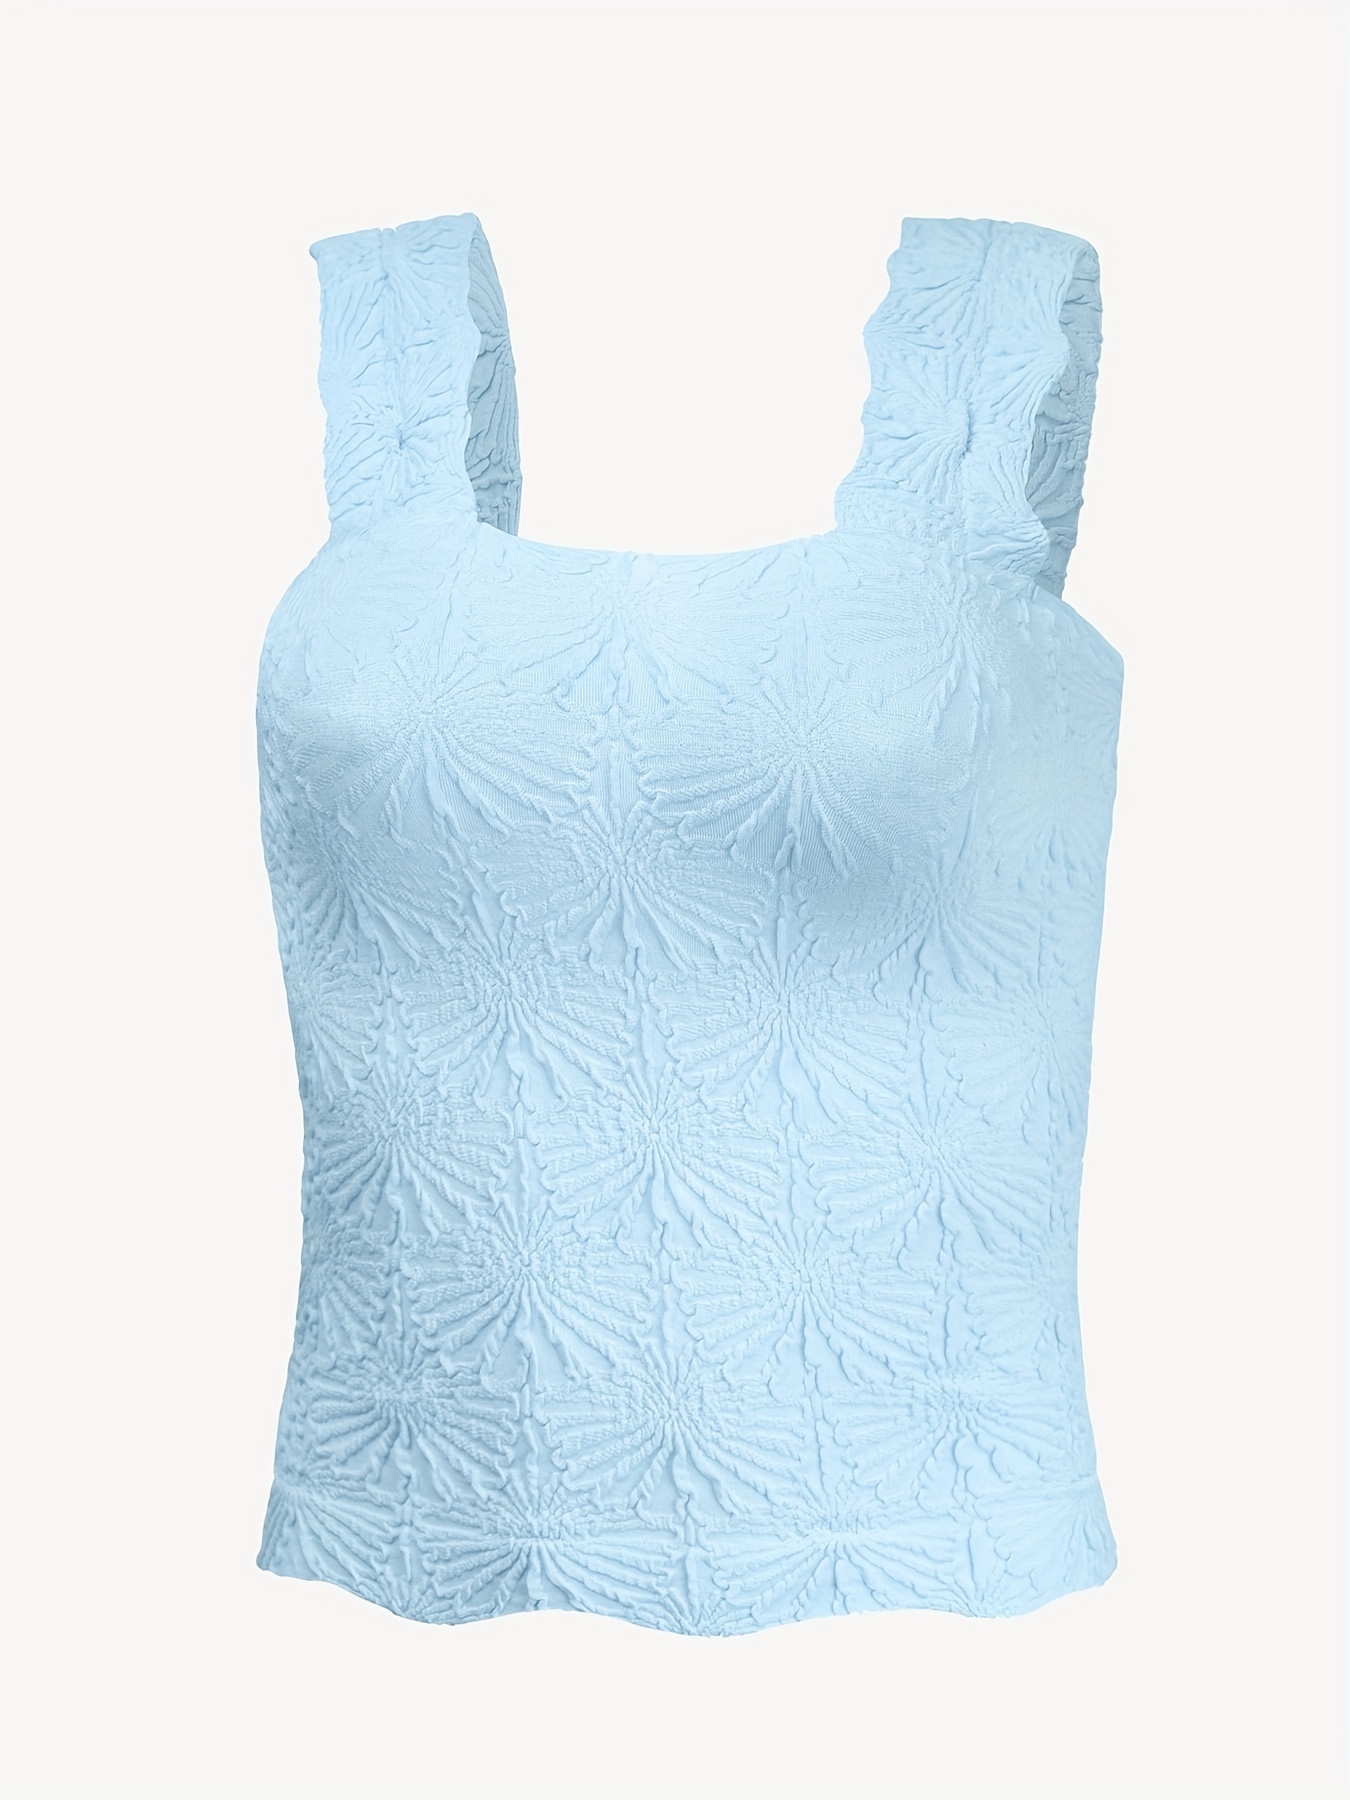 Aeropostale French Blue Floral V-Neck Cami Tank Top XL Cotton Stretch  Strappy